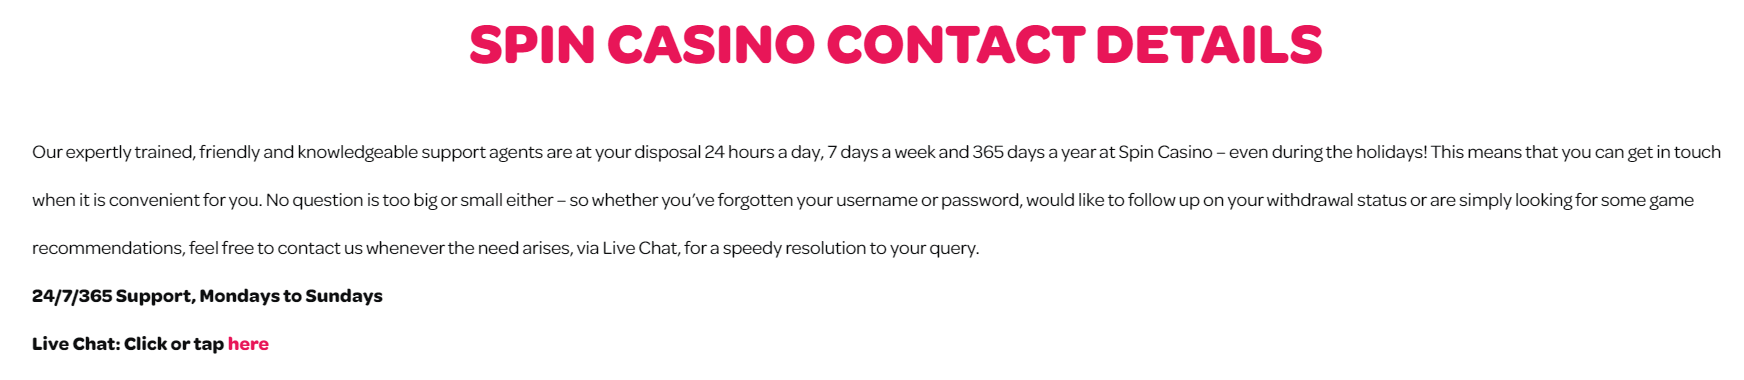 spin casino contact details